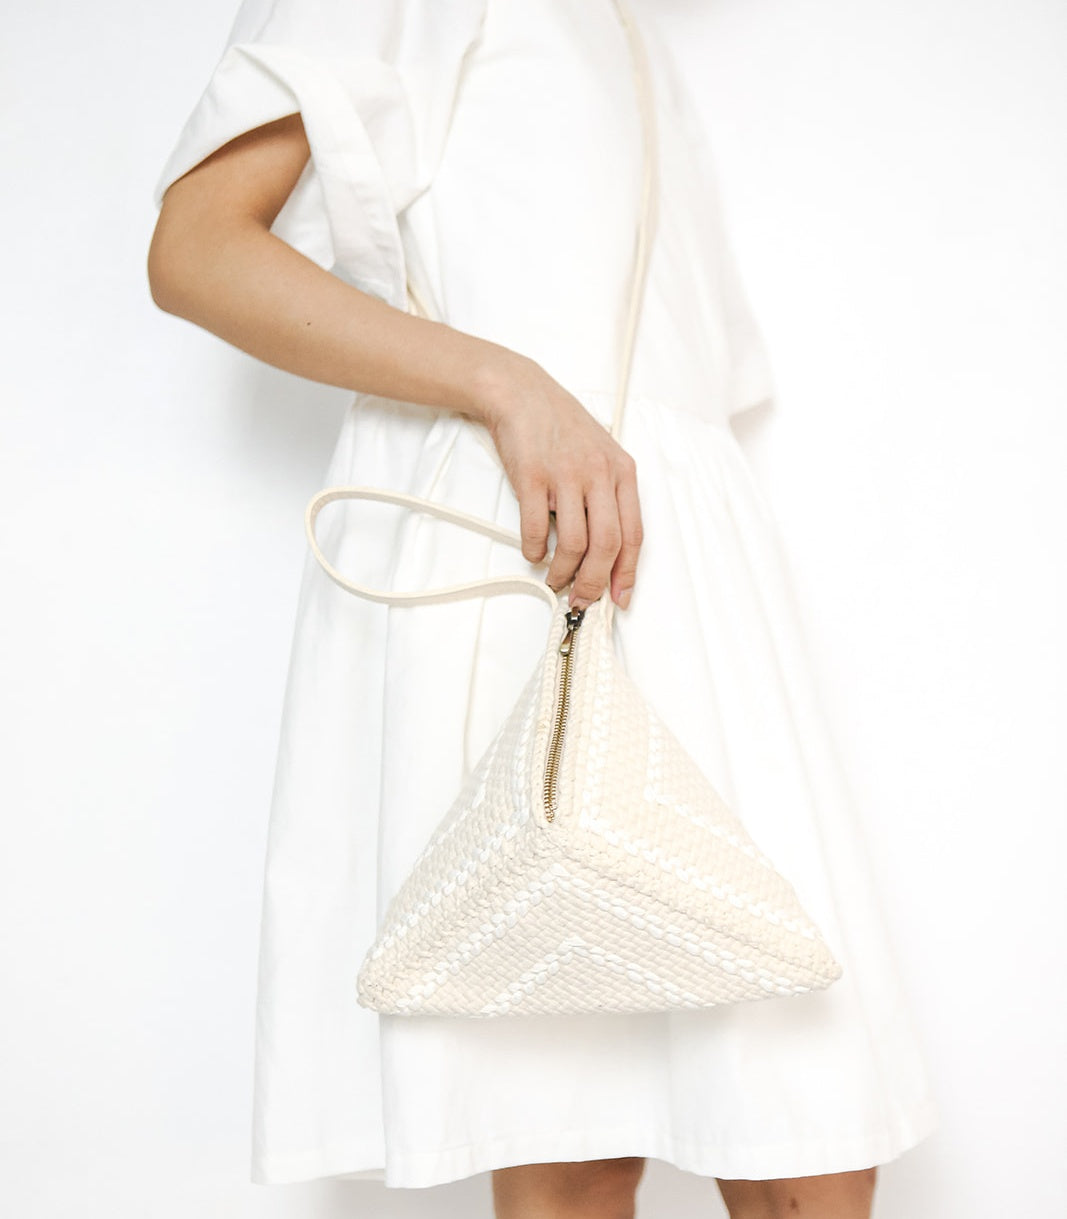 Puso Pyramid Handbag with a model - Beige - Rags2Riches